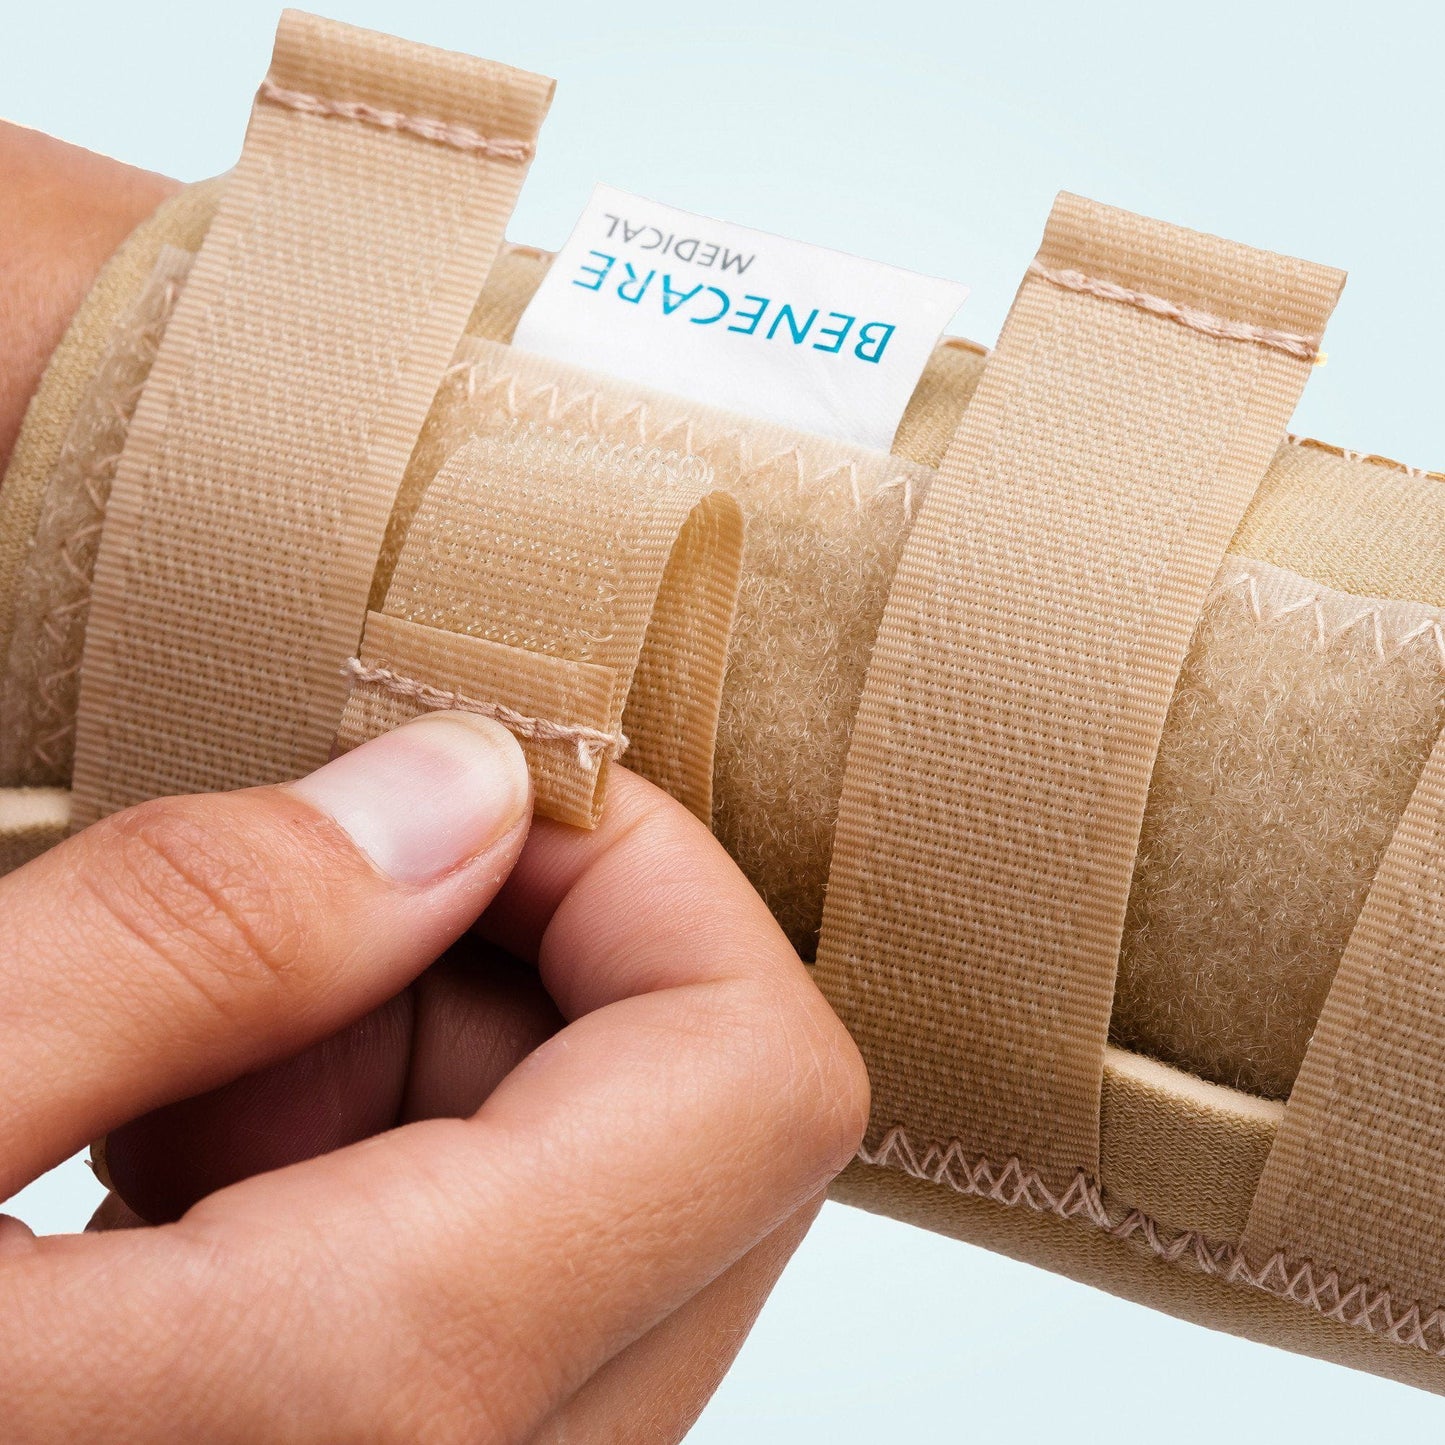 The Benecare Neoprene Open Wrist/Thumb Support hook and loop straps.